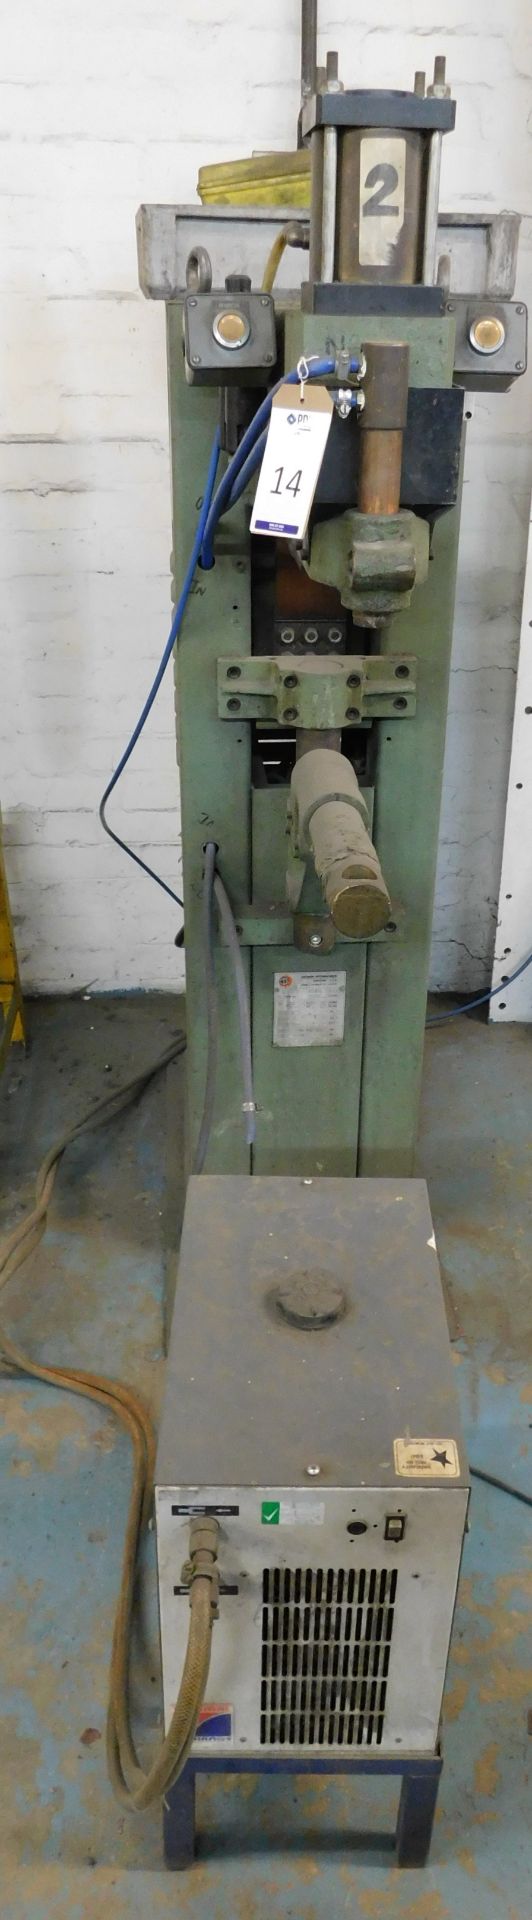 Costruzioni Model PPN52 Spot Welder, Serial Number 43832 with Thermal Exchange Unit, Serial Number